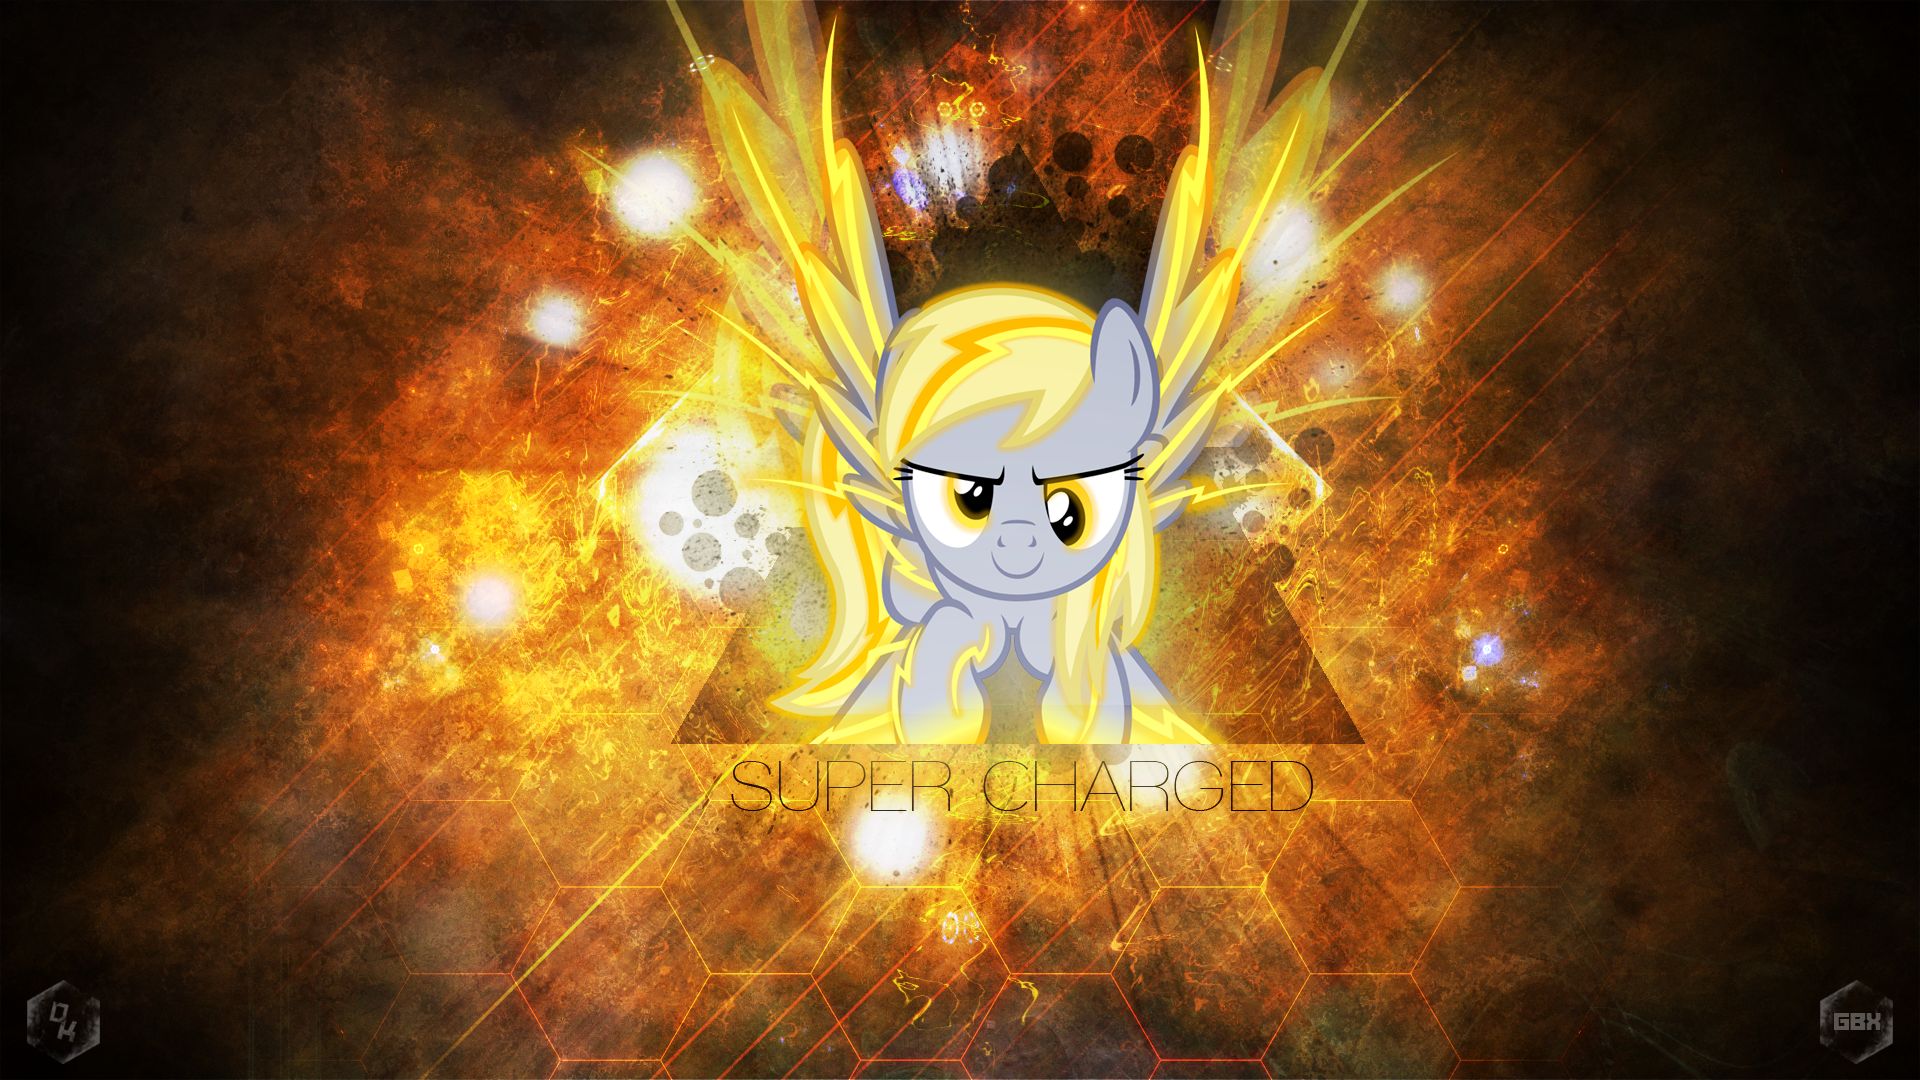 my little pony, tv show, my little pony: friendship is magic, derpy hooves, text, vector